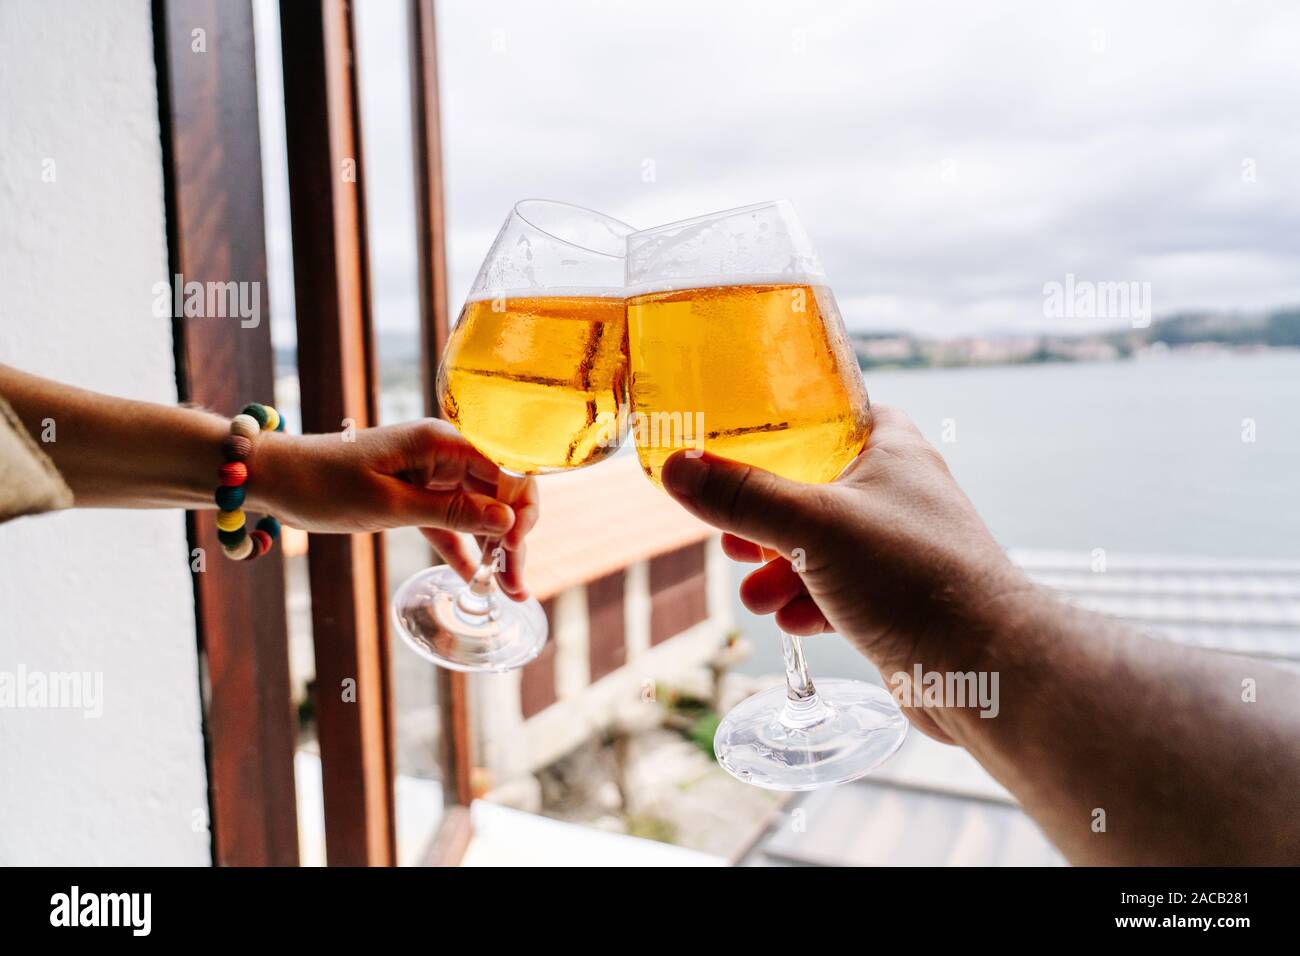 detail of the hands of two people toasting with beer in the window of a restaurant overlooking the sea Stock Photo